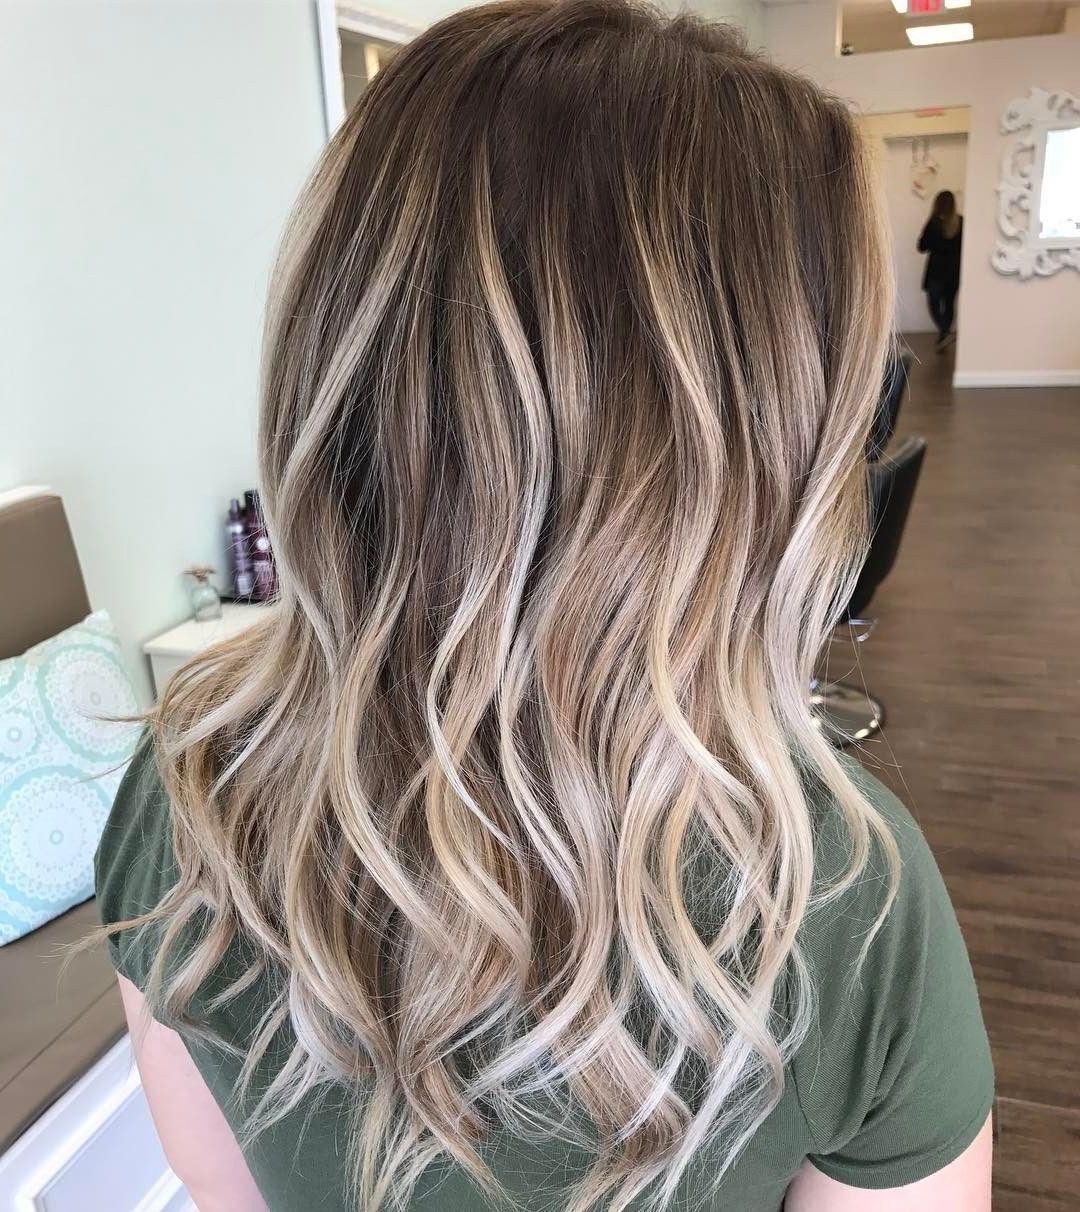 Sandy Blonde Hair Color As Of Neutral Hair Trends – Solbiatese With 2018 Sandy Blonde Hairstyles (View 17 of 20)